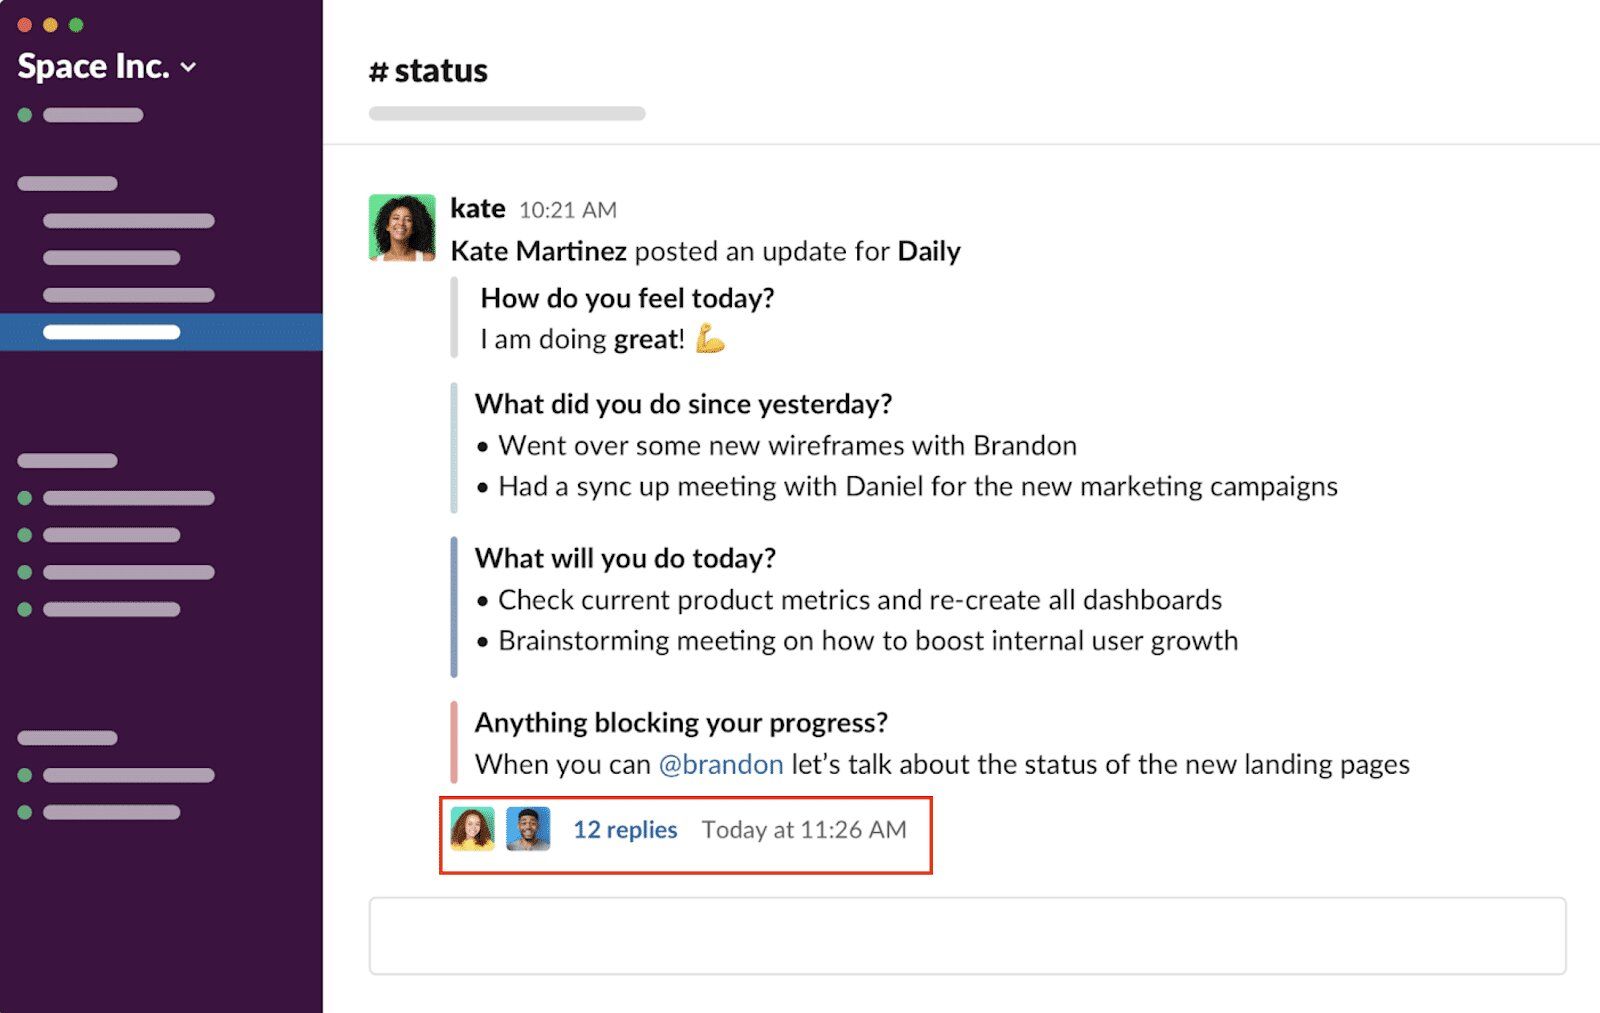 To have a proper understanding of each task progress and set the new ones for your remote workers - a daily team meeting is a necessity (*image by [Geekbot](https://geekbot.com/blog/asynchronous-scrum/){ rel="nofollow" target="_blank" .default-md}*)